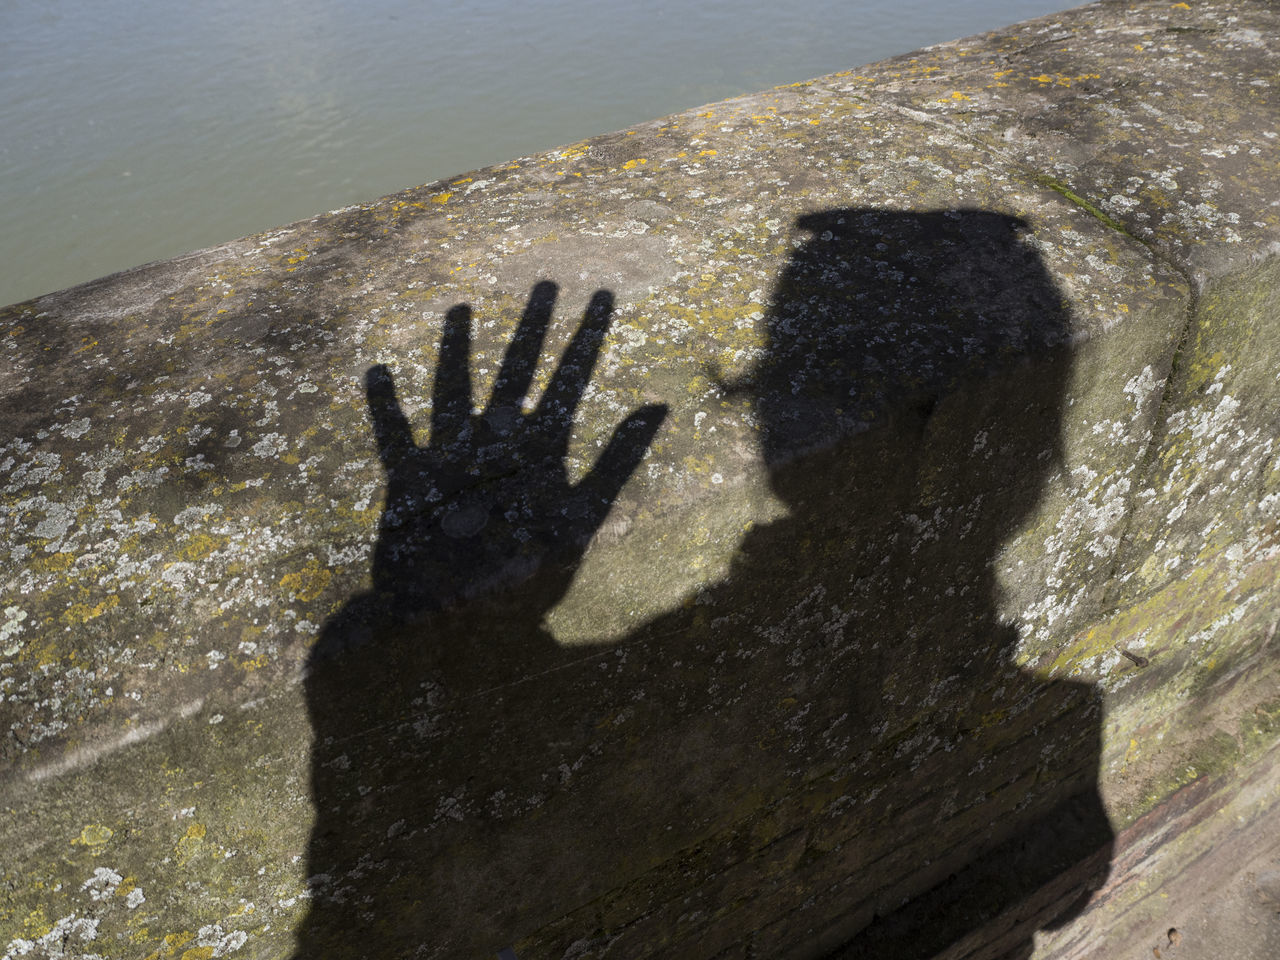 SHADOW OF PERSON HAND ON WALL